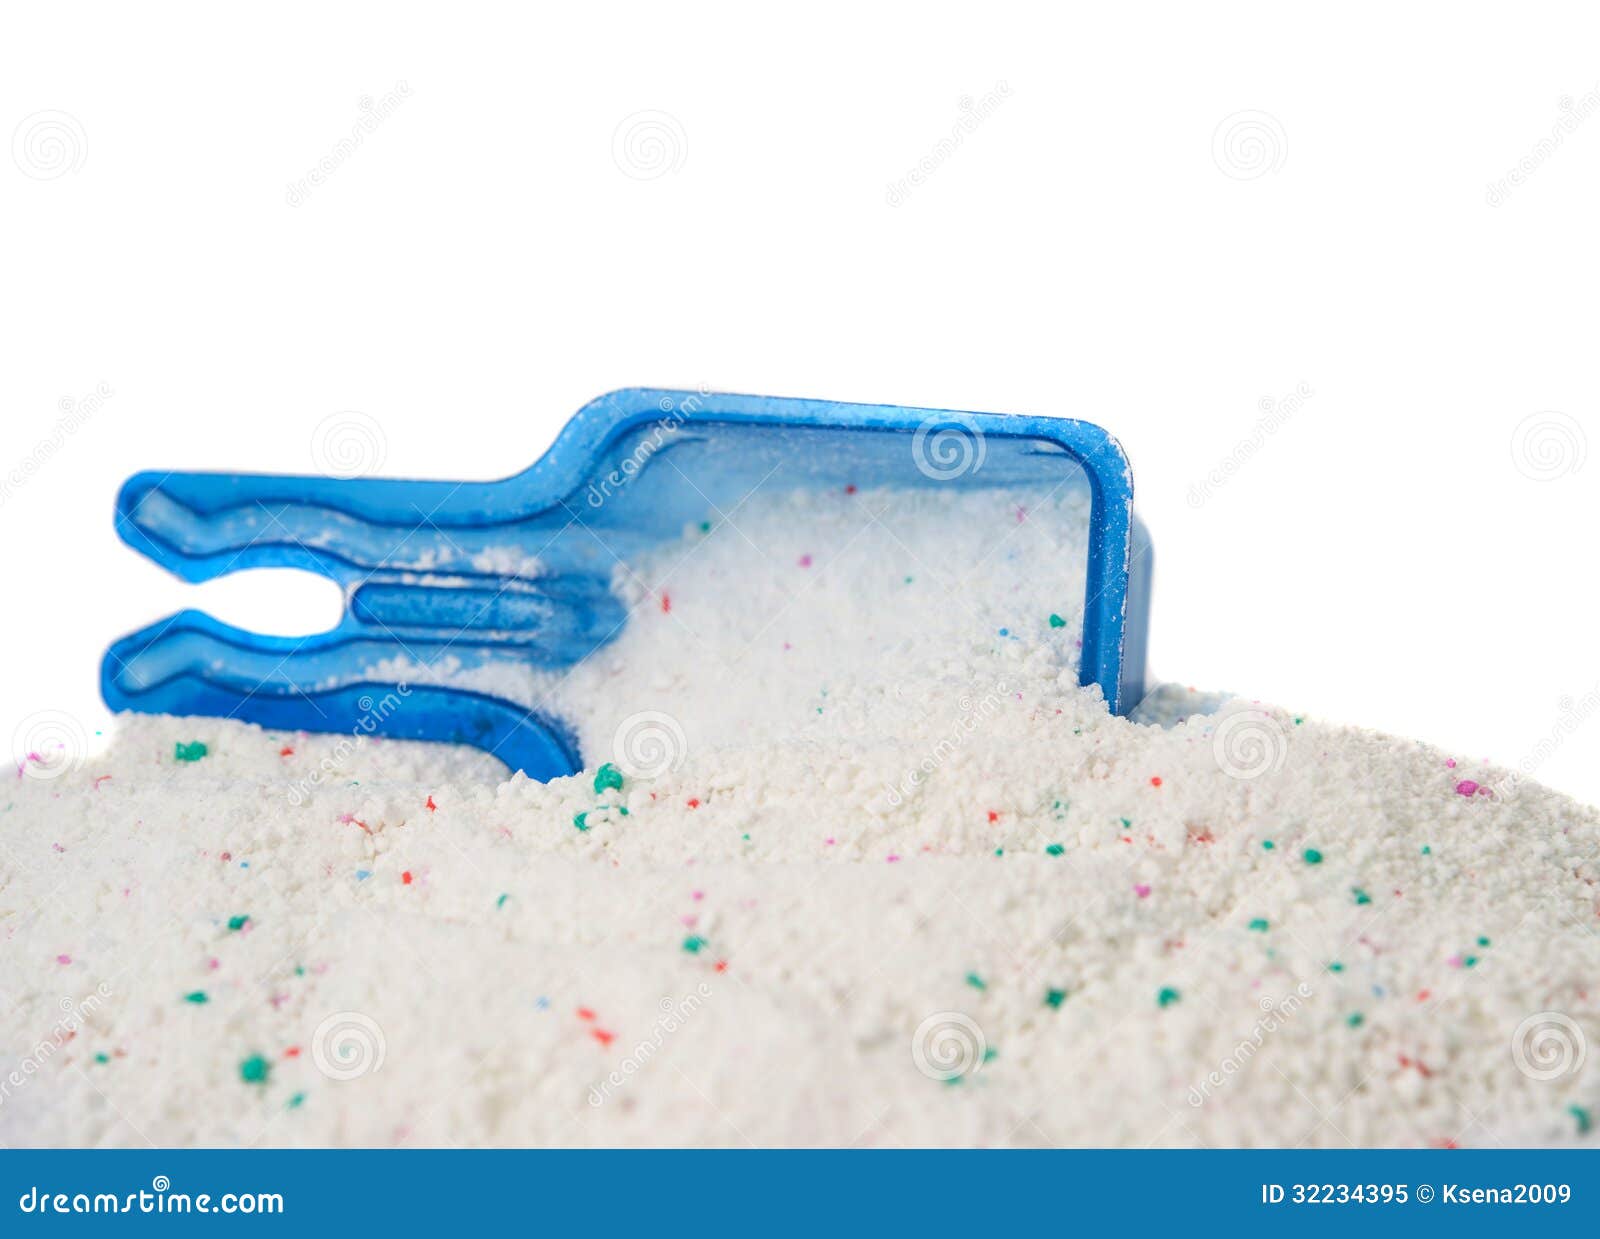 https://thumbs.dreamstime.com/z/washing-powder-measuring-cup-white-background-32234395.jpg